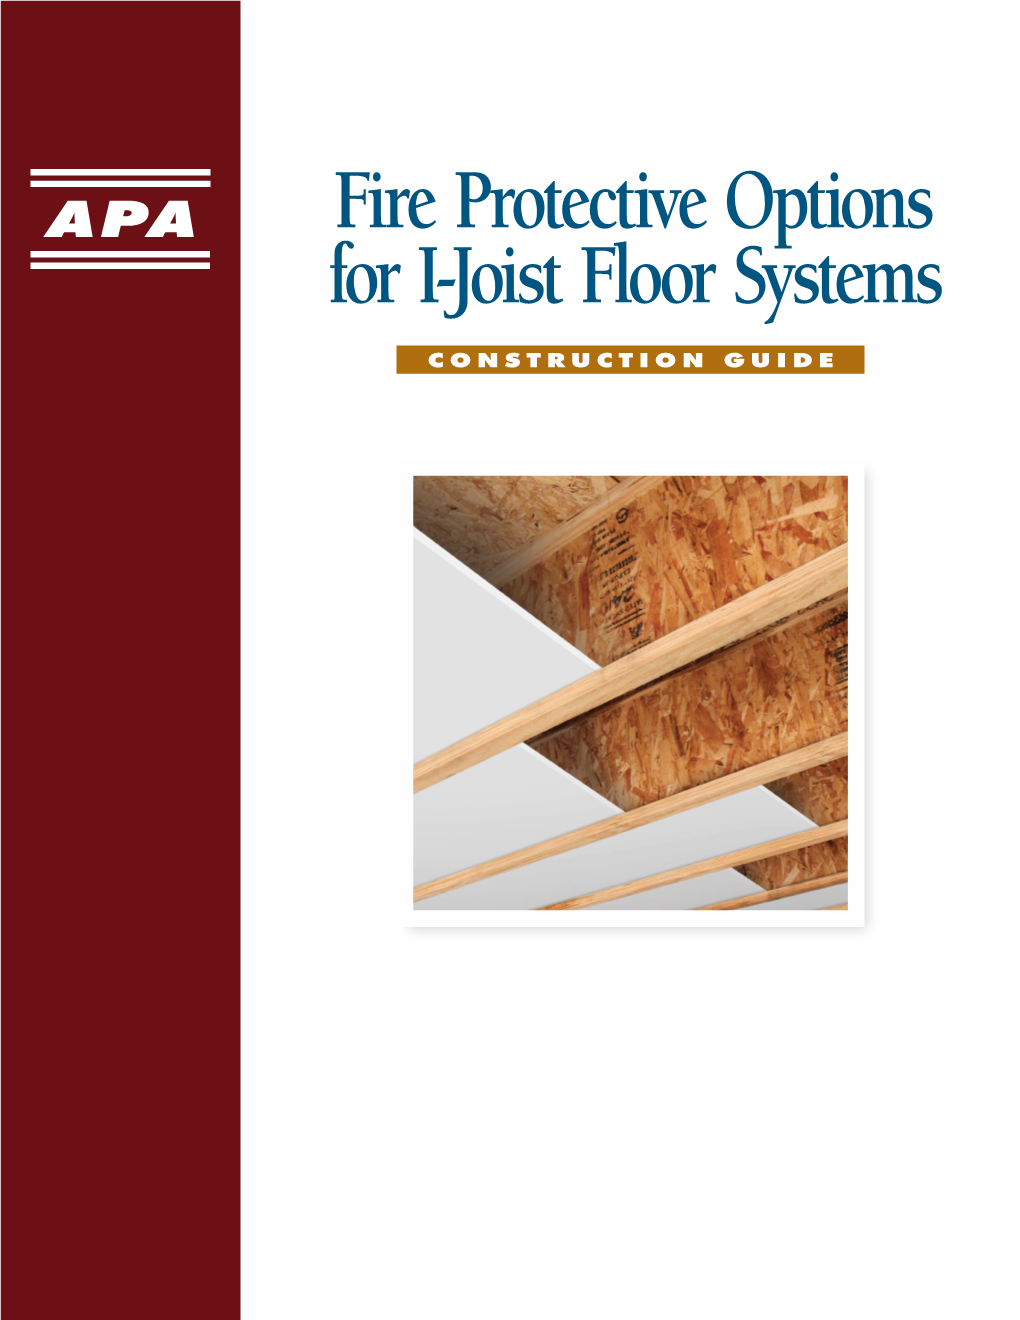 Fire Protective Options for I-Joist Floor Systems